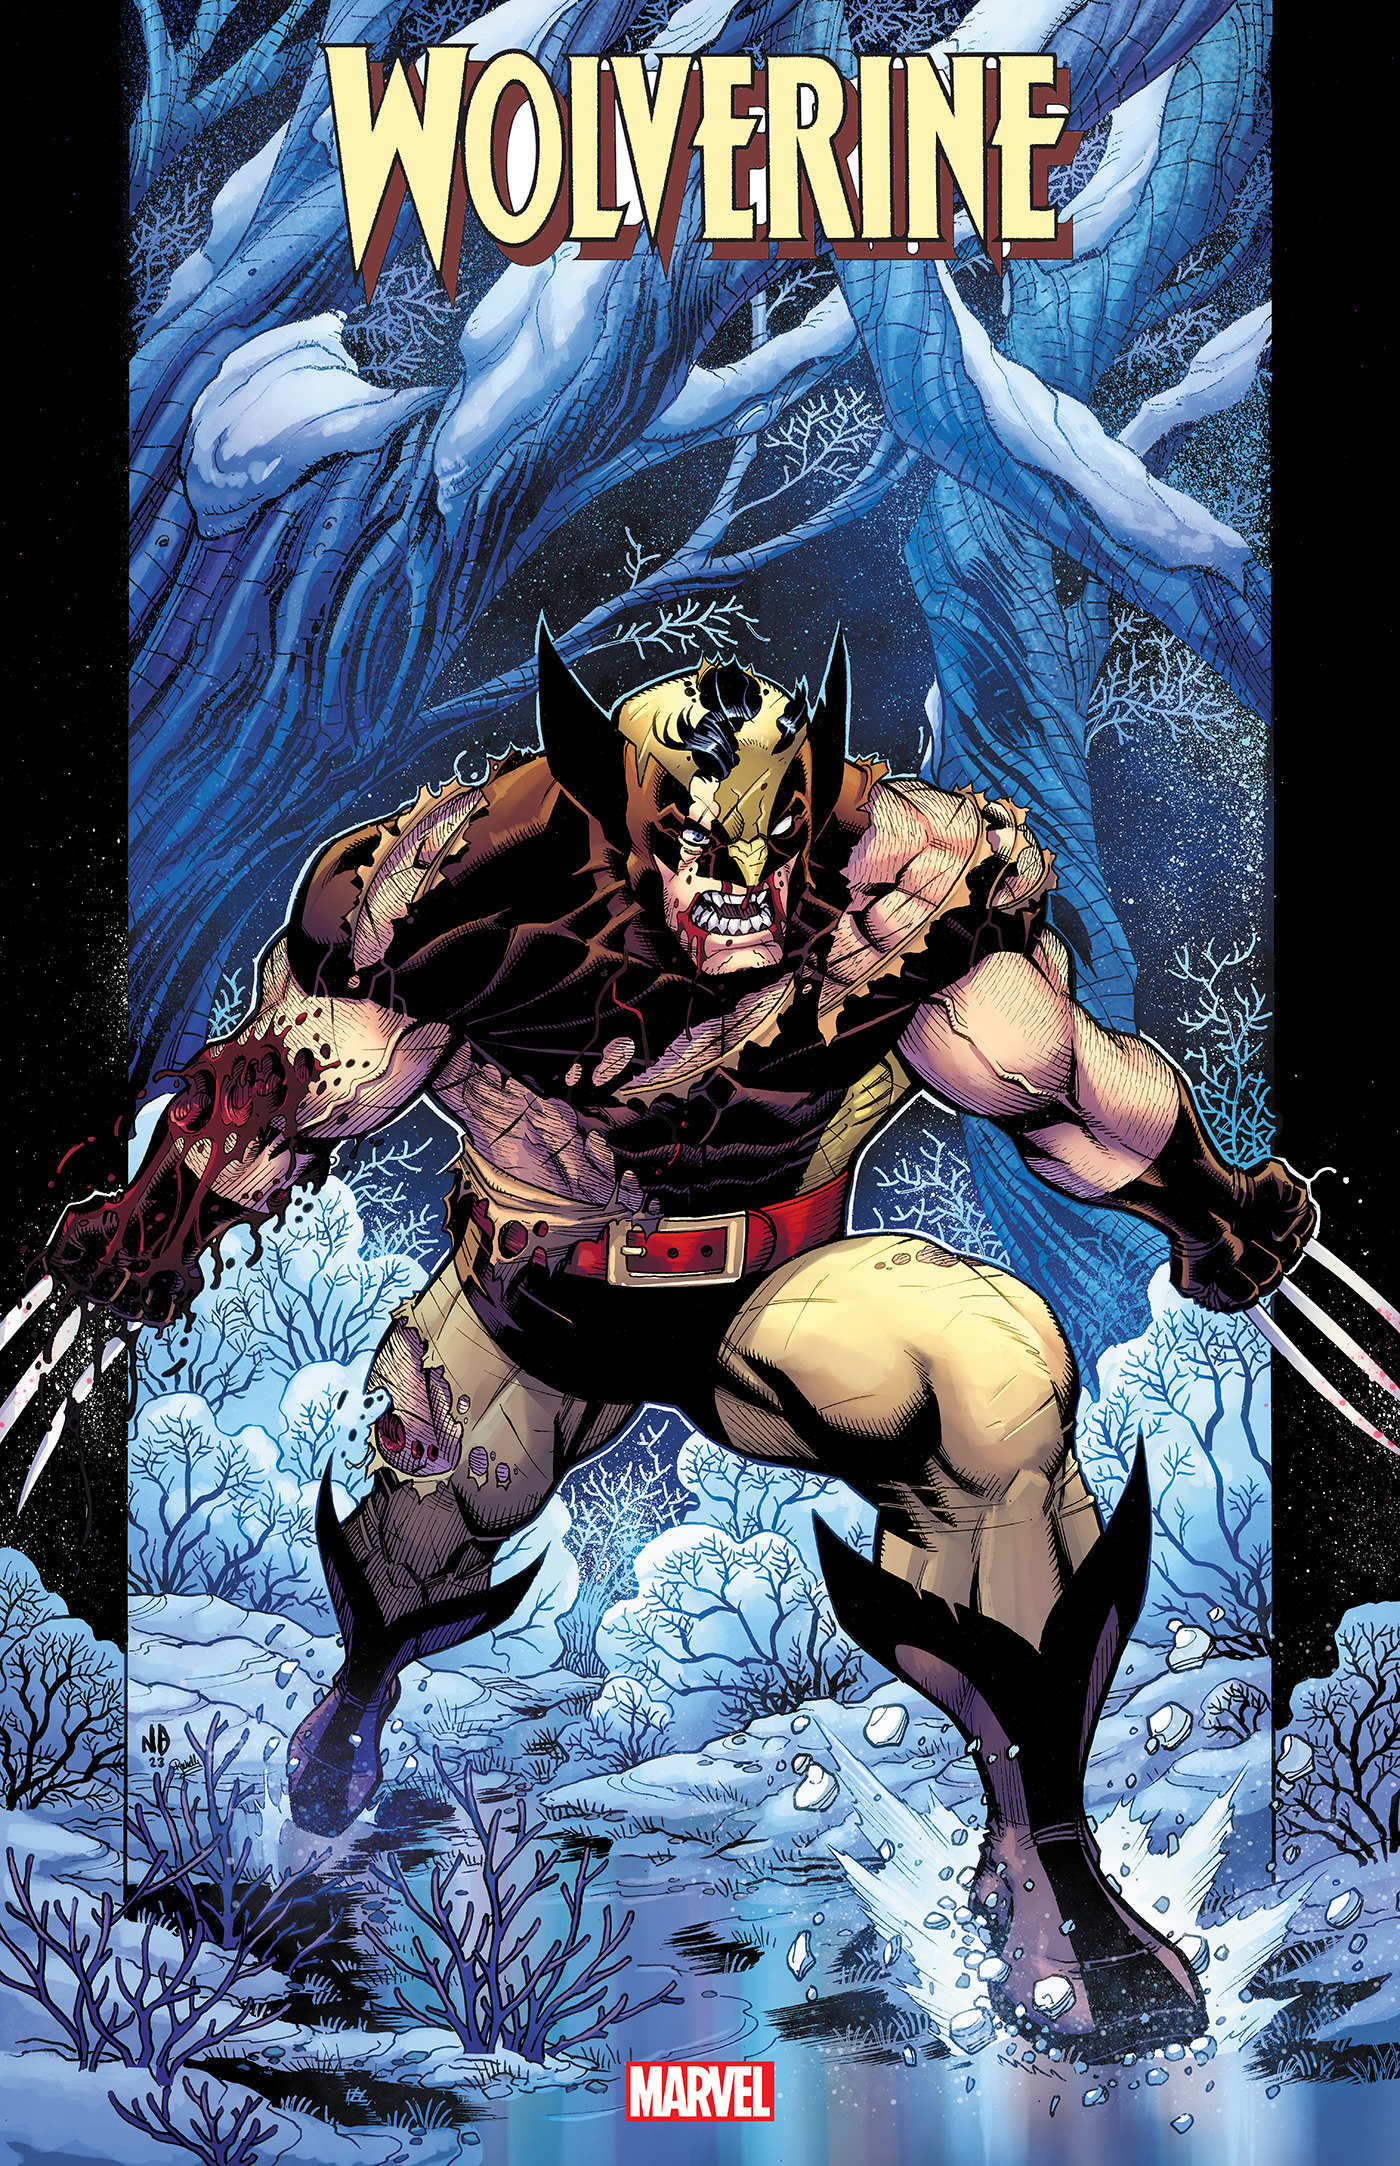 Wolverine By Claremont & Buscema #1 Facsimile Edition Nick Bradshaw Variant [New Printing] 1 for 25 Incentive